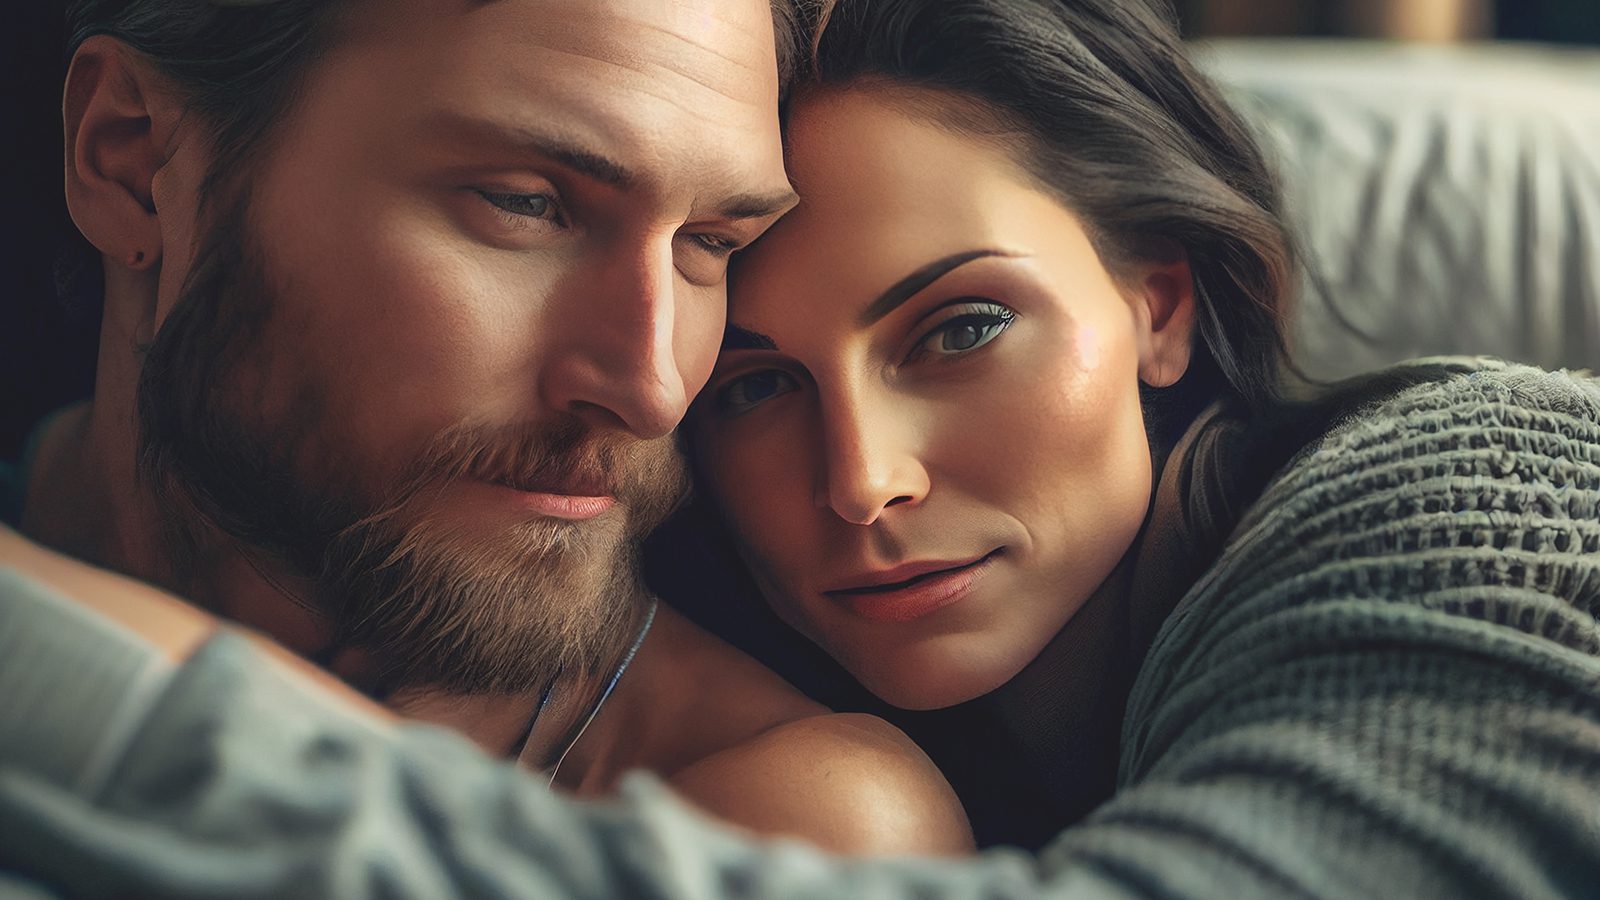 30 Affirmations for Men to Make Women Fall in Love